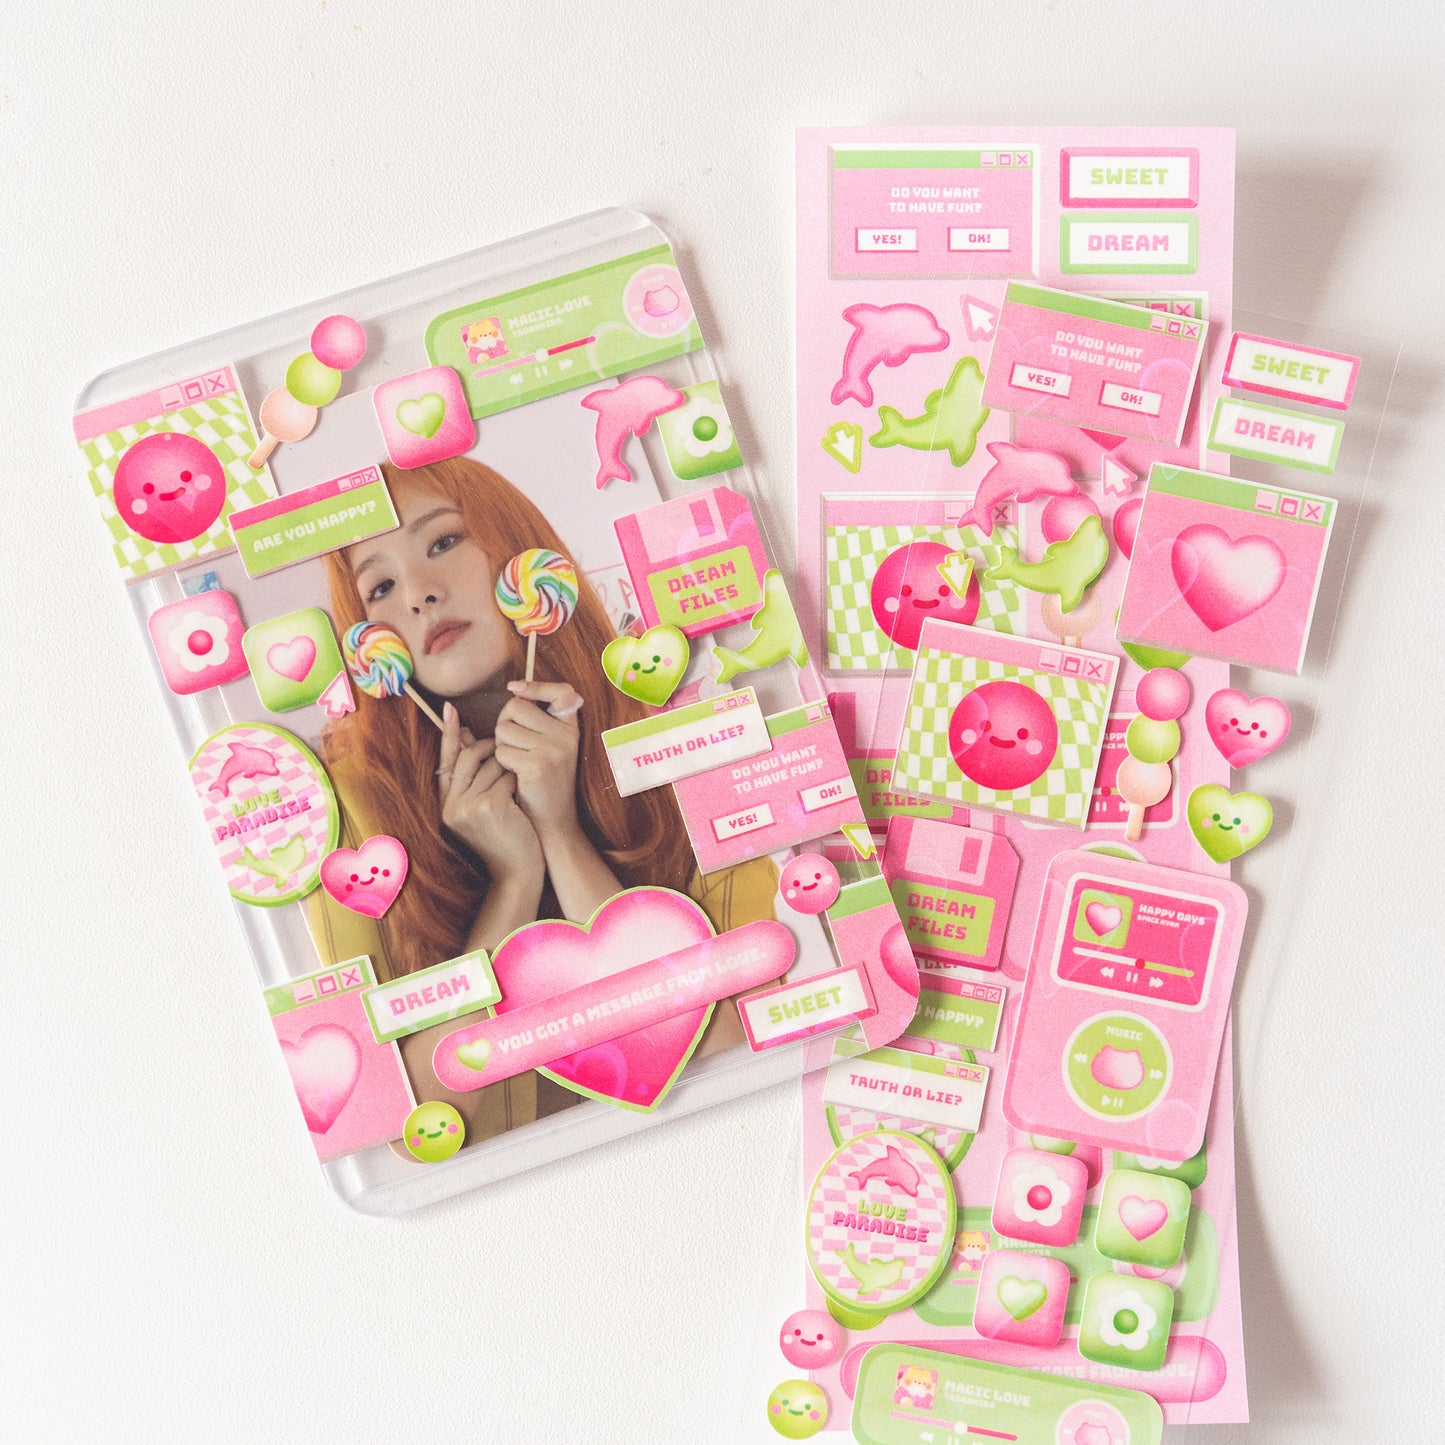 Y2K Pink and Green Windows and Gadgets and Journal Sticker Sheet